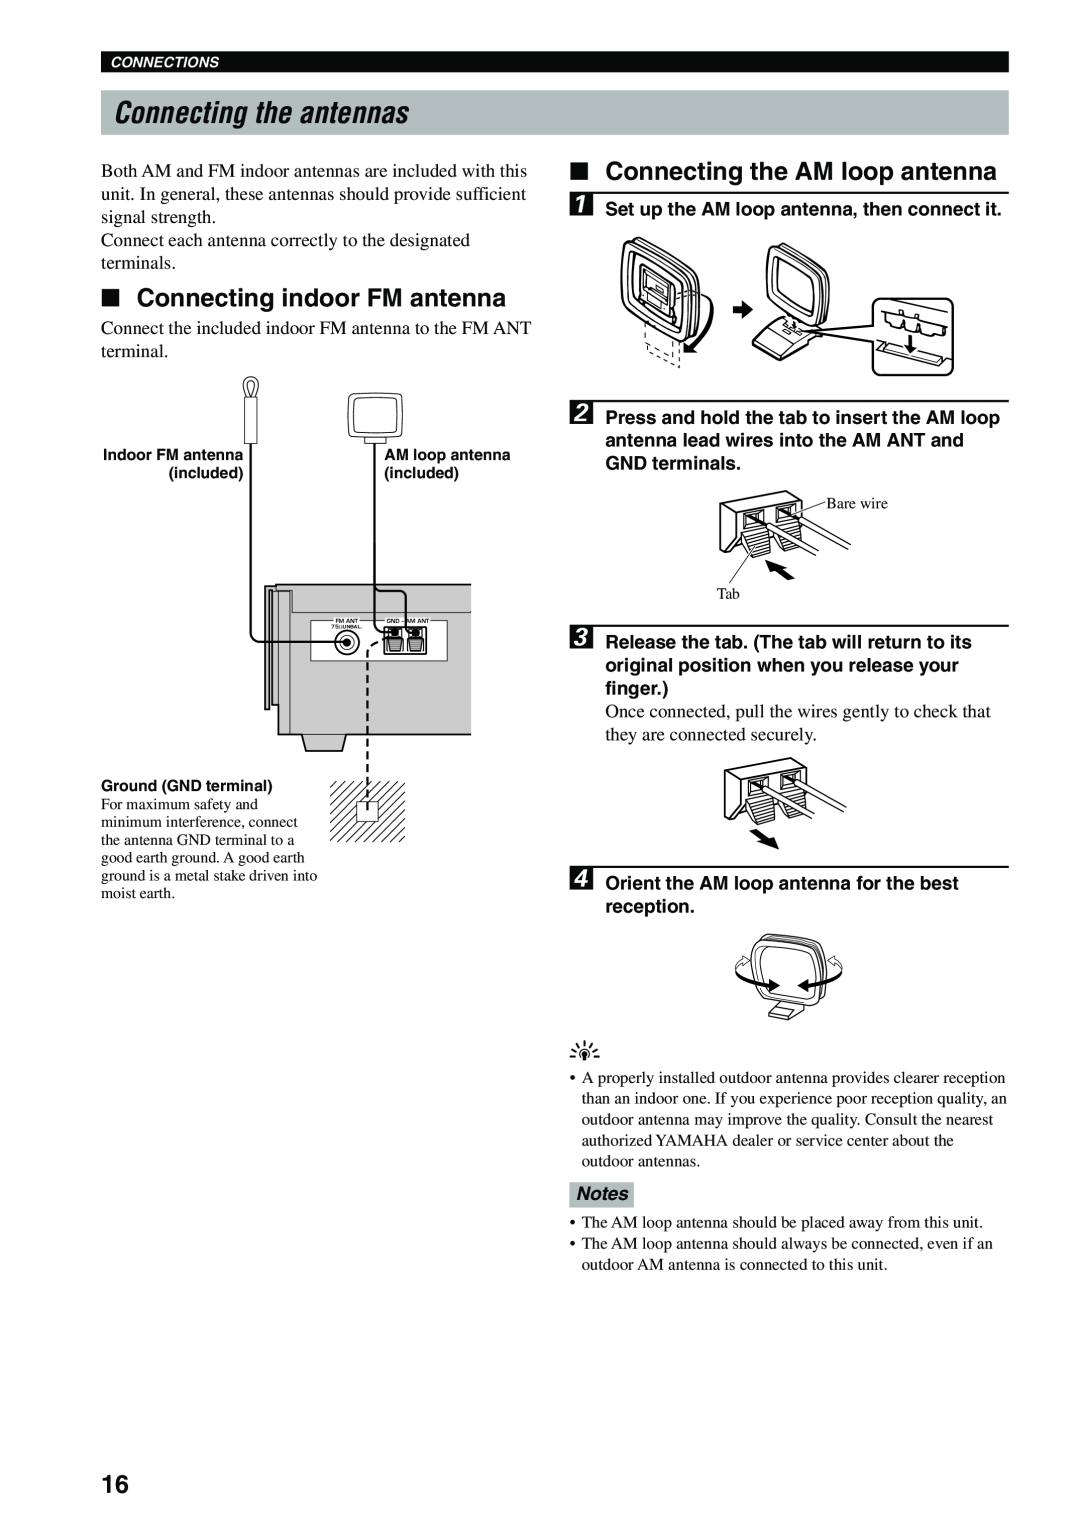 Yamaha DVX-S100 owner manual Connecting the antennas, Connecting indoor FM antenna, Connecting the AM loop antenna 